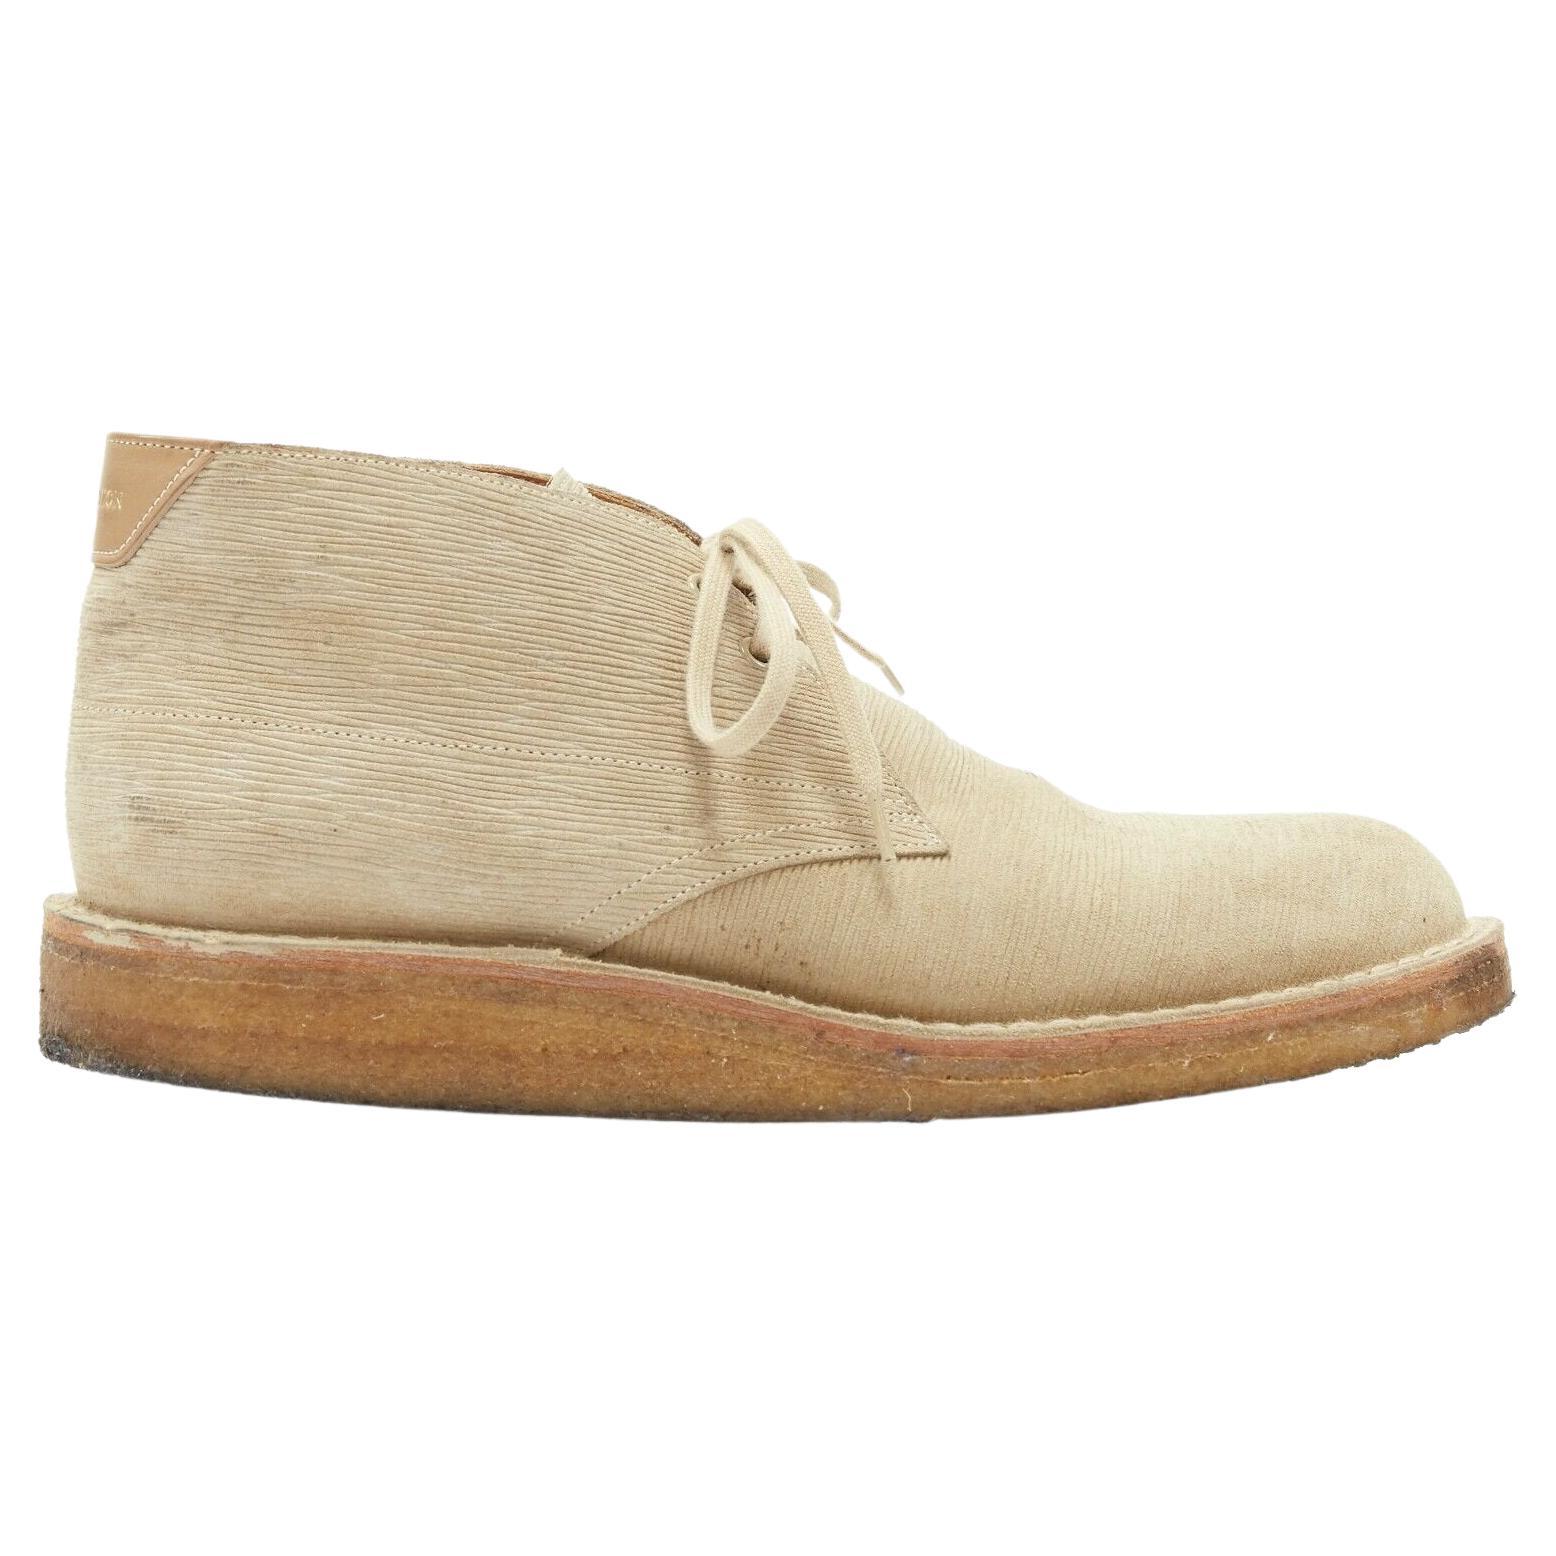 LOUIS VUITTON taupe sand epi suede crepe sole ankle desert boot UK5 EU39 For Sale